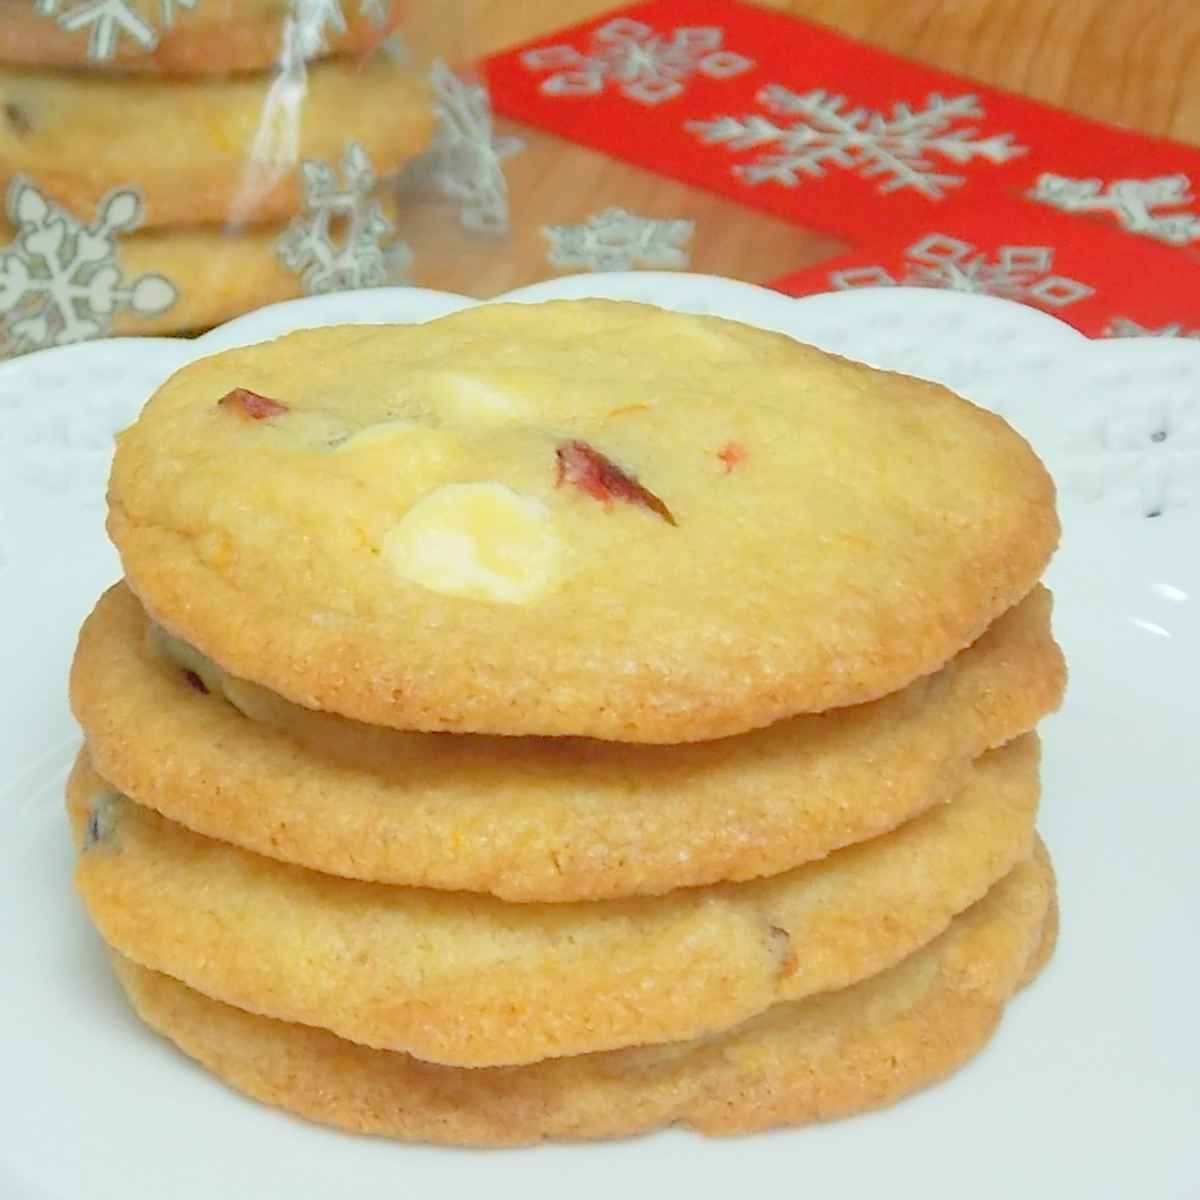 A stack of 4 White Chocolate Cranberry Cookies on a white plate.